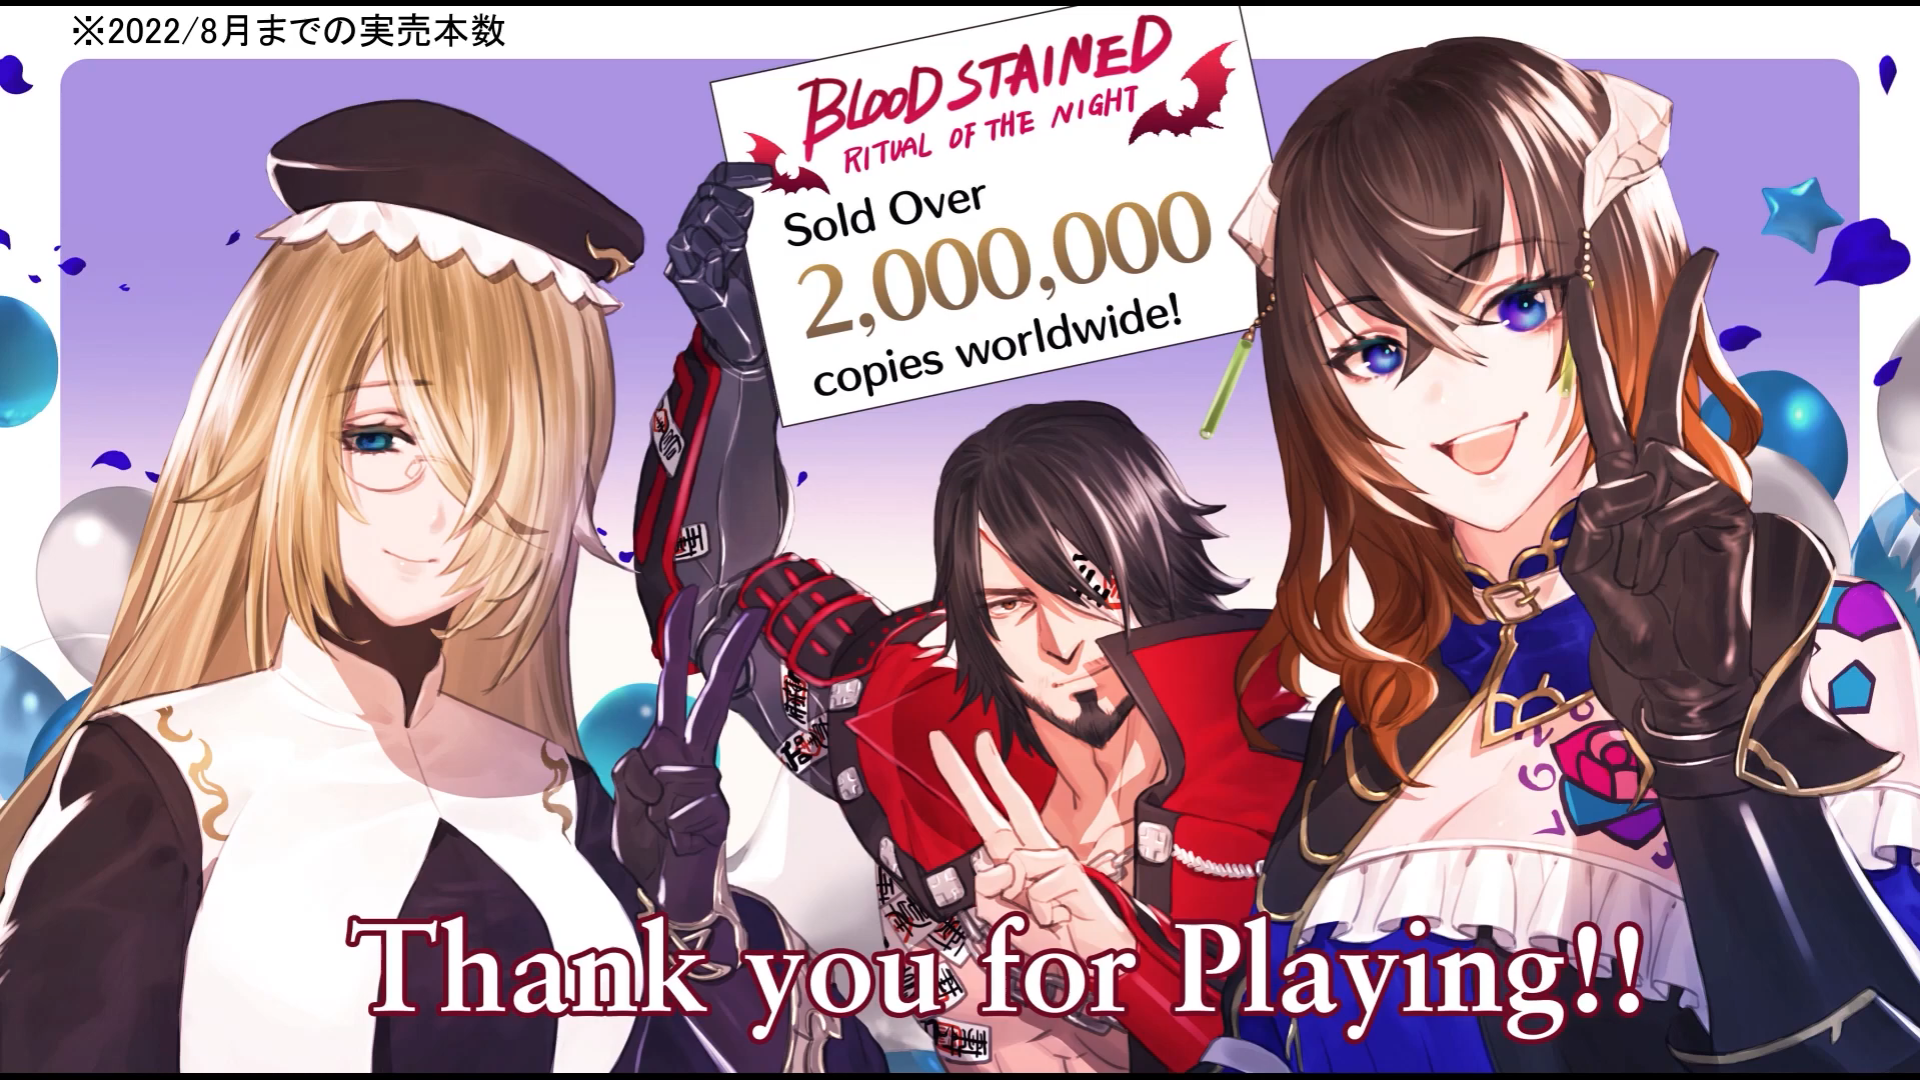 Bloodstained: Ritual of the Night Sells Over 2 Million Units Worldwide; Remaining Content Delayed Due to COVID, New Costumes & Game Mode Revealed